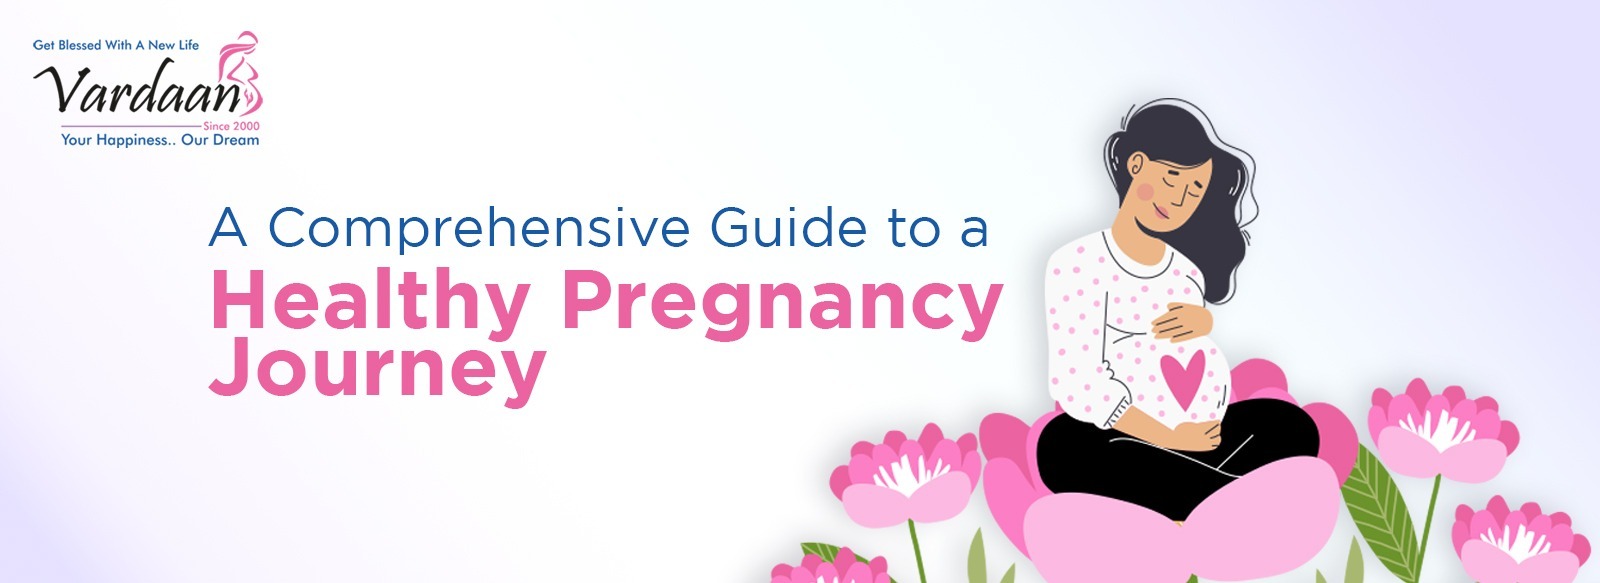 Is Ovary Size Important To Get Pregnant? - Vardaan Medical centre